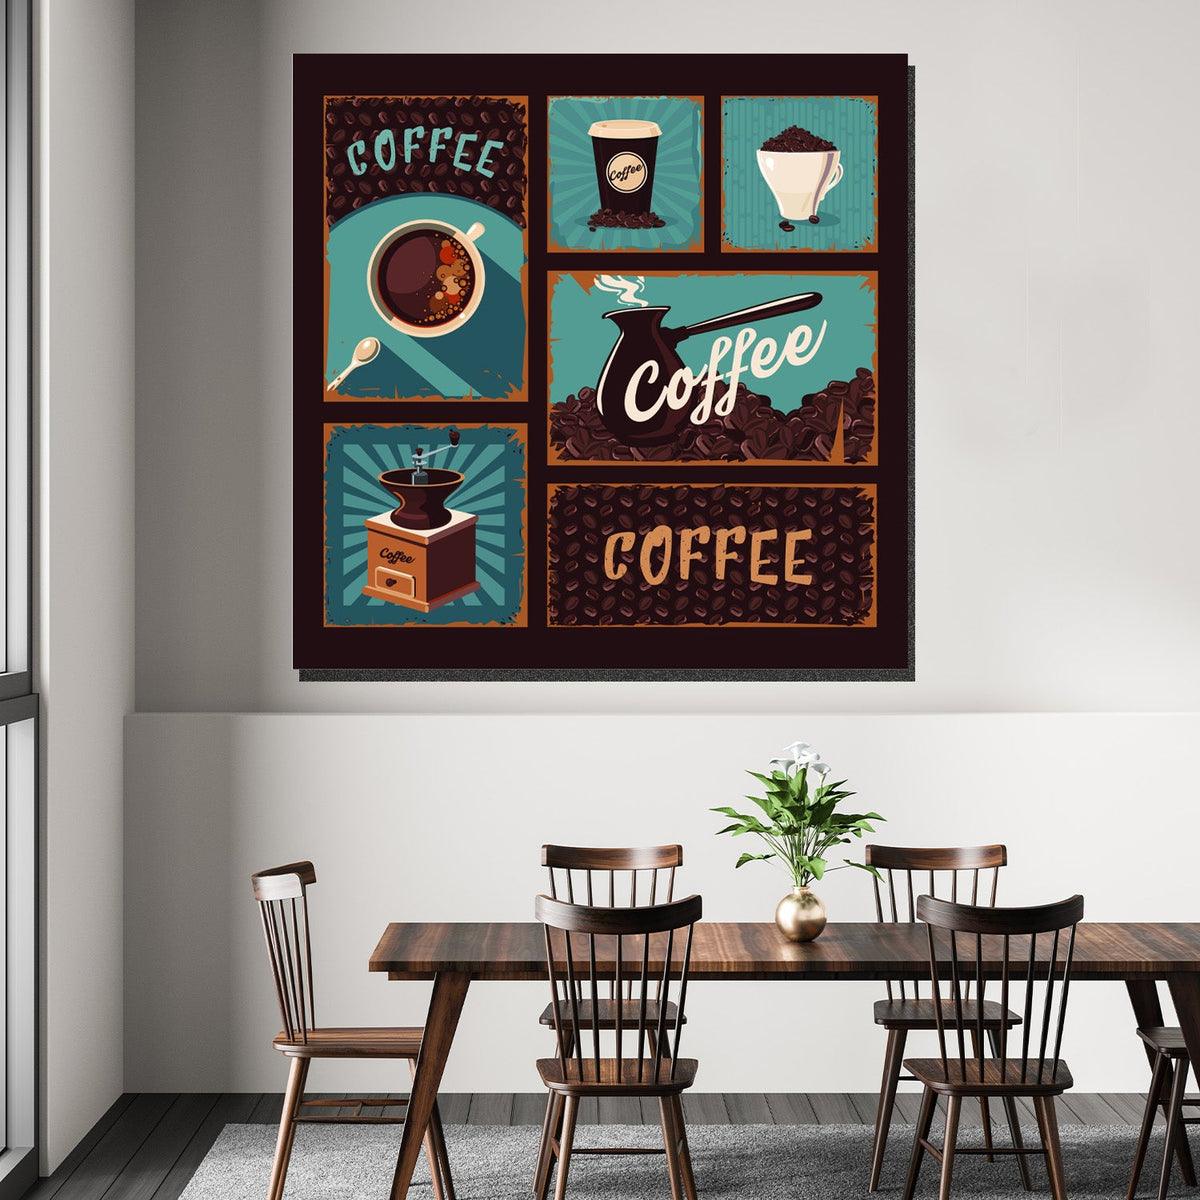 https://cdn.shopify.com/s/files/1/0387/9986/8044/products/CoffeeshopPosterCanvasArtprintStretched-1.jpg